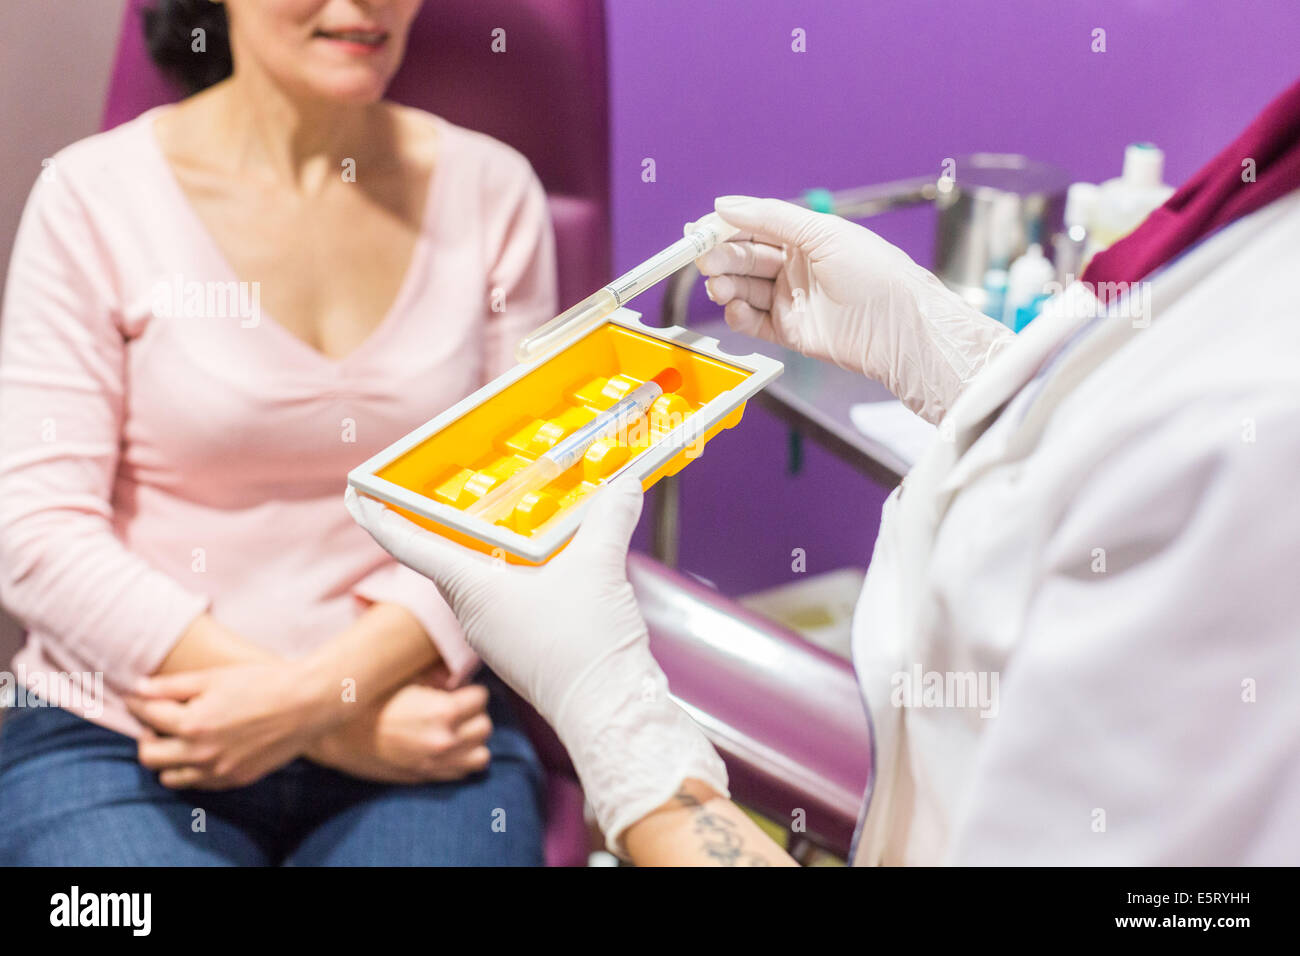 Oral flora testing in a medical laboratory. Stock Photo